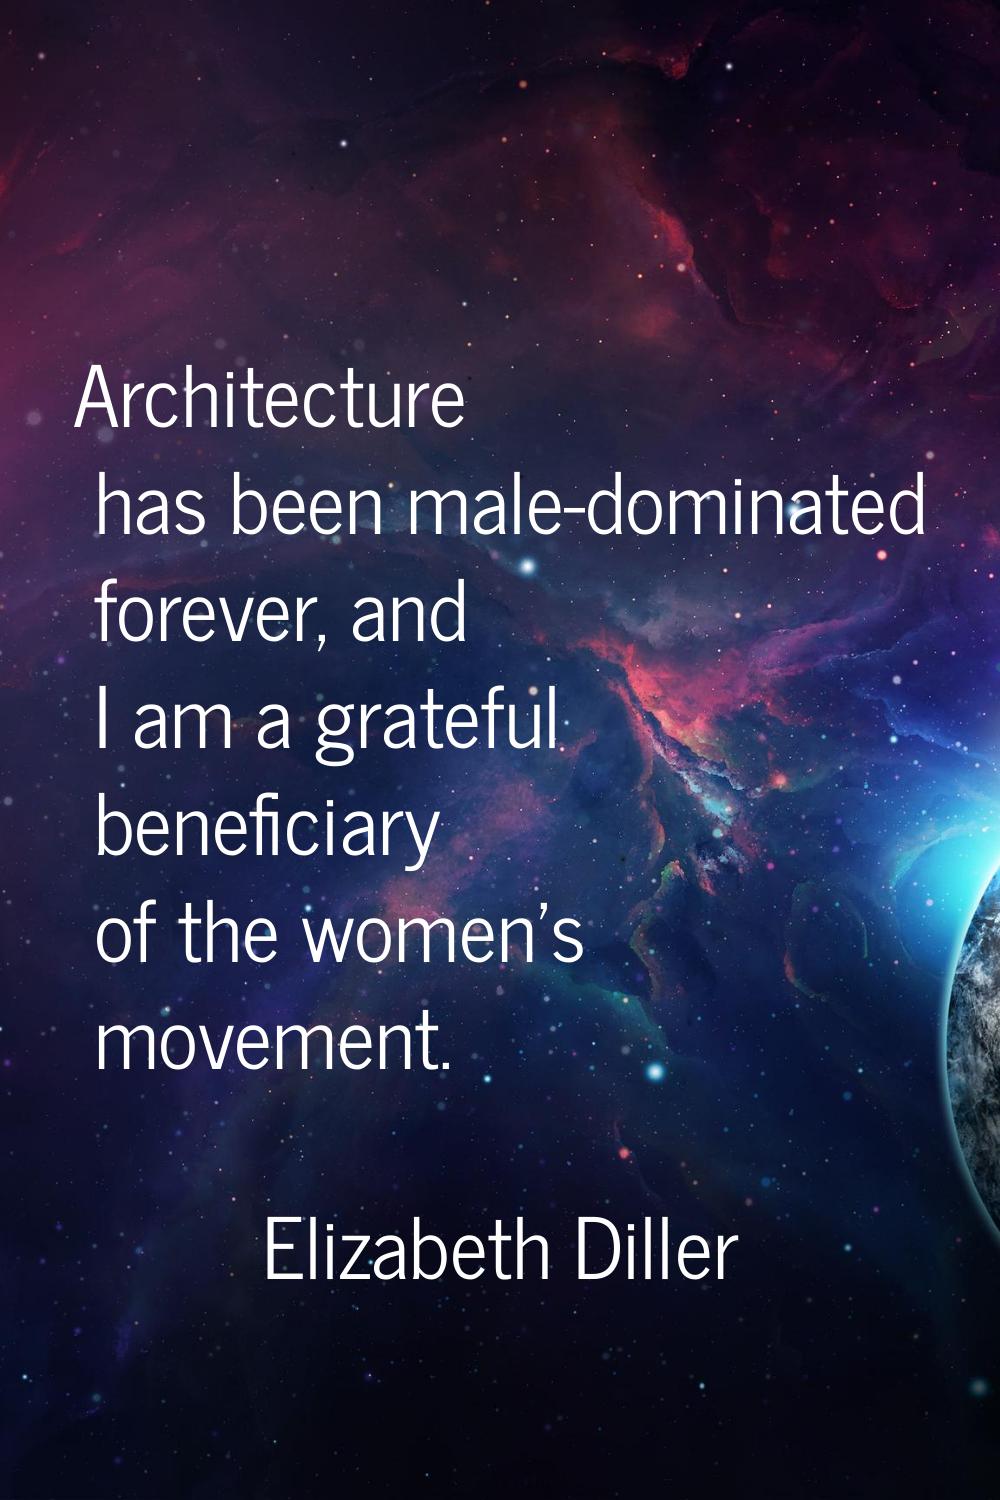 Architecture has been male-dominated forever, and I am a grateful beneficiary of the women's moveme